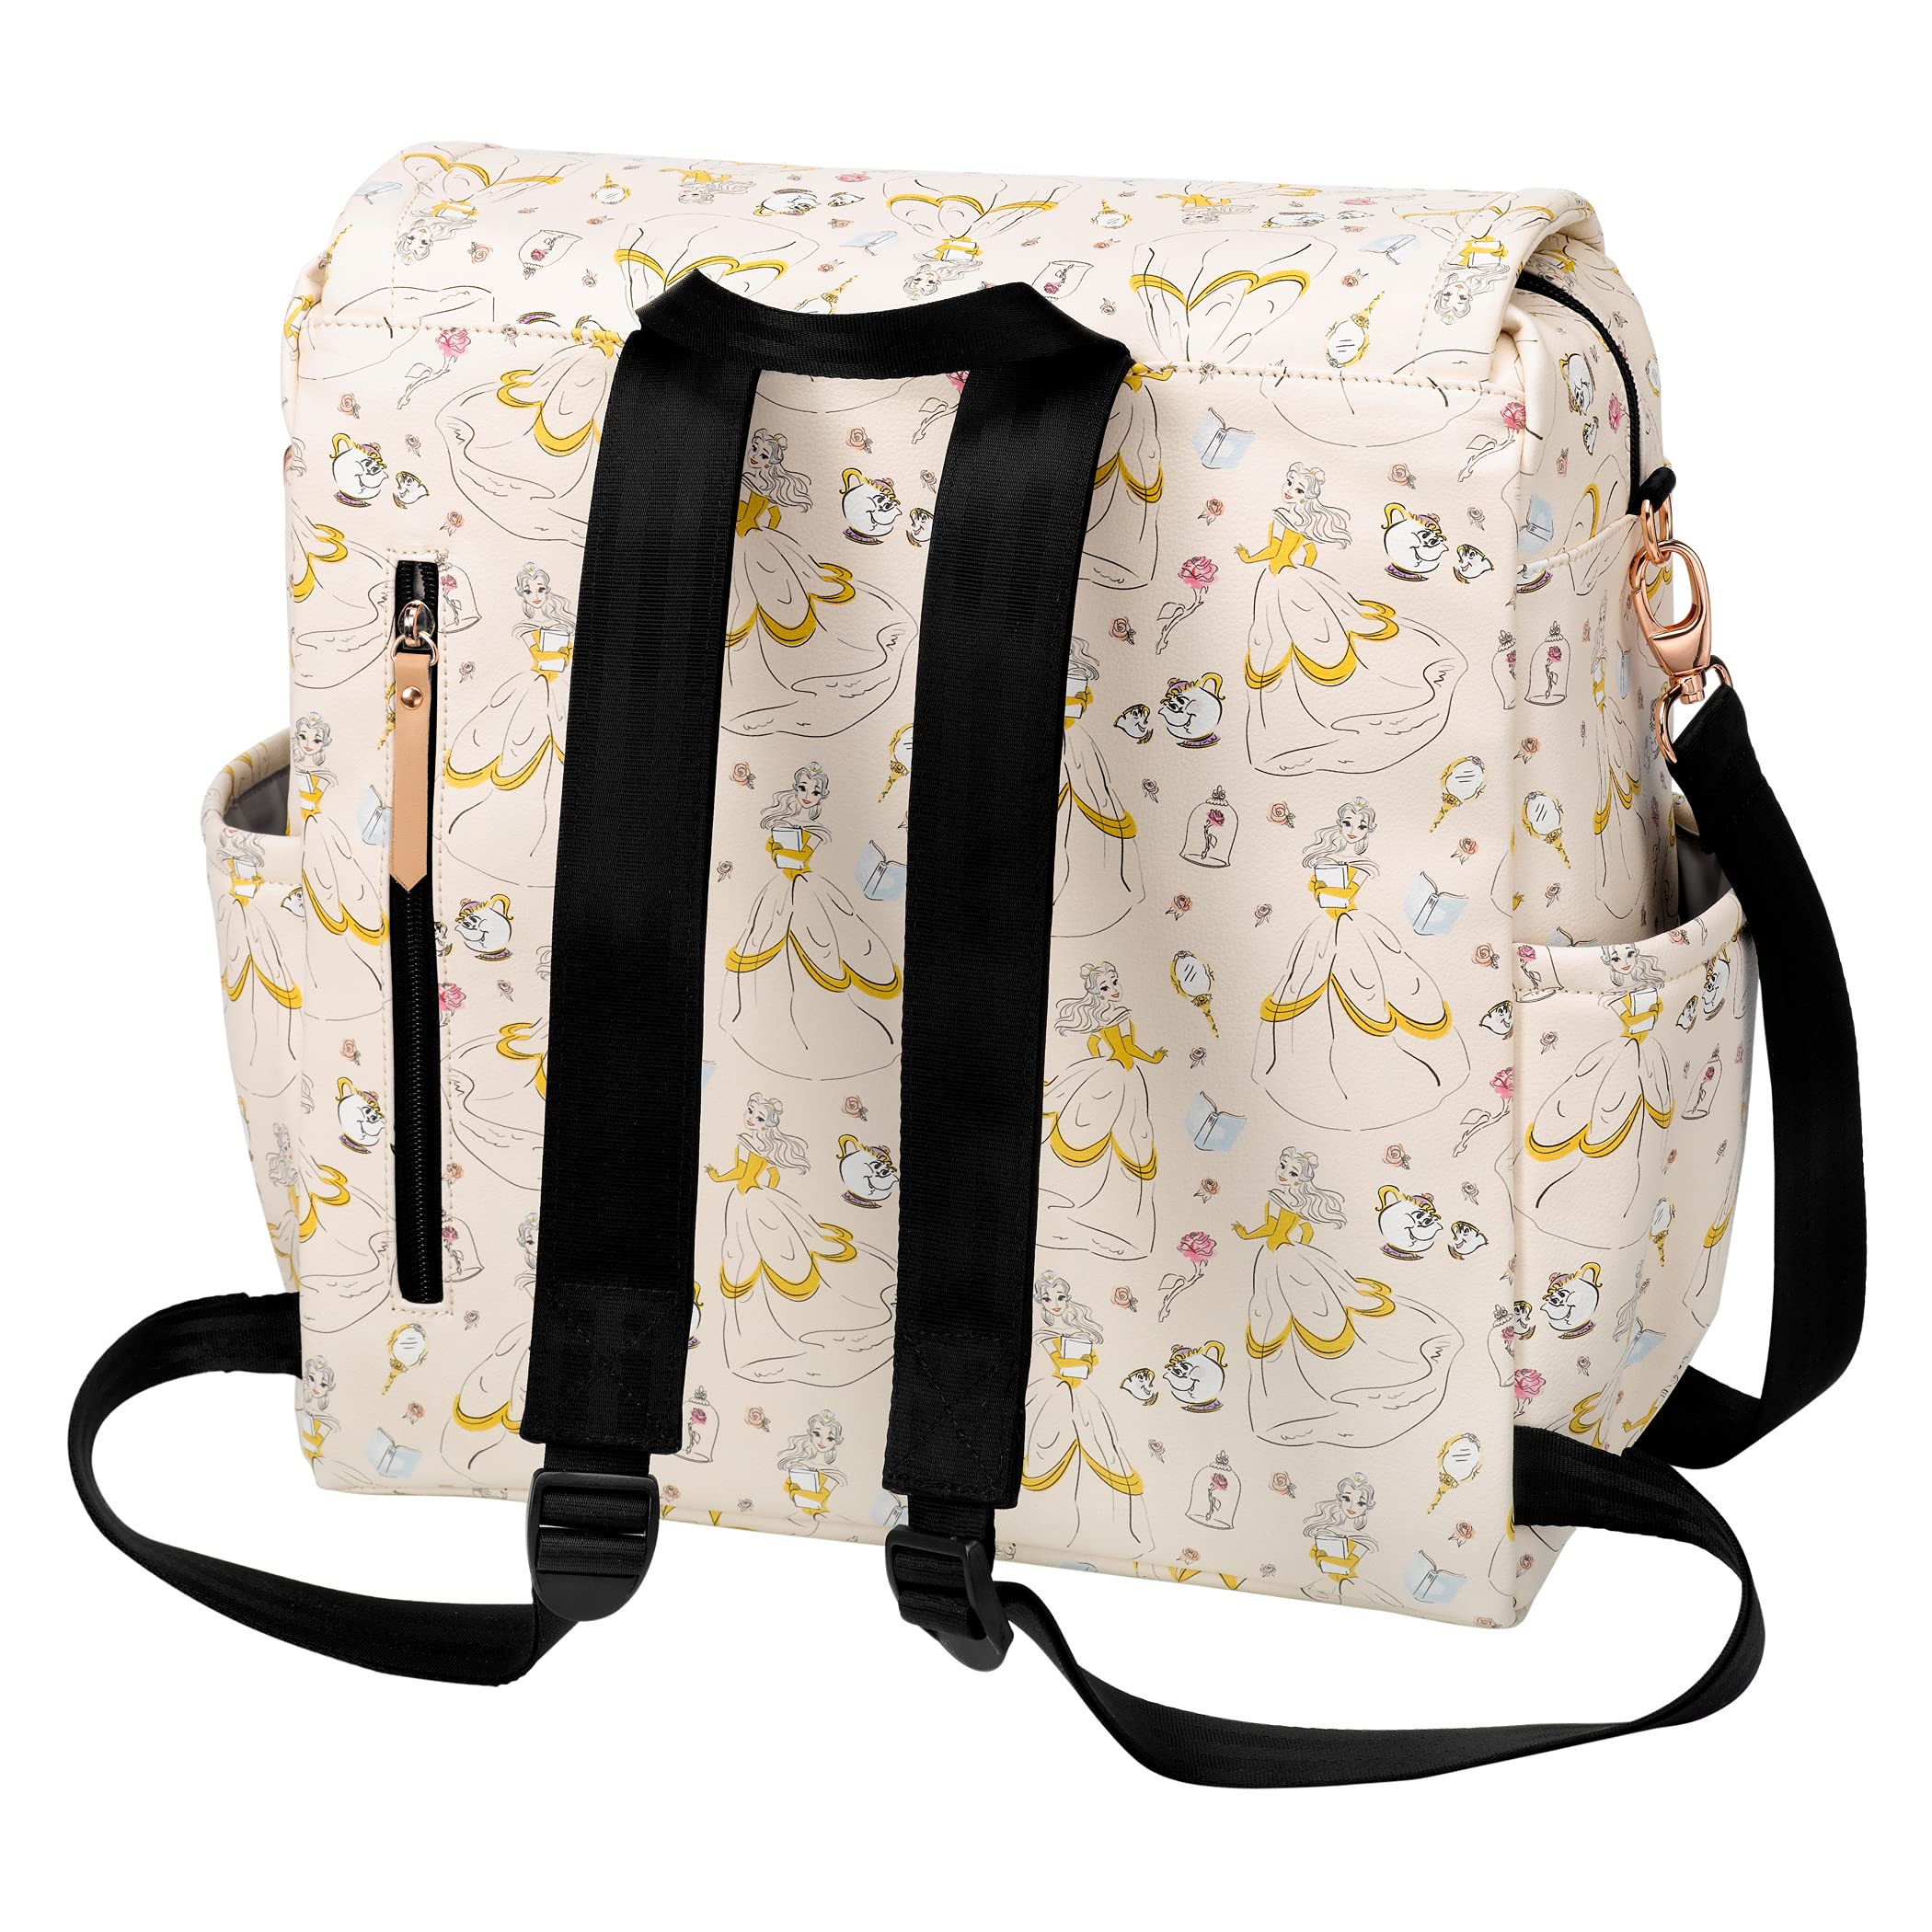 Petunia Pickle Bottom Boxy Backpack Diaper Bag for Parents | Top-Selling Stylish Baby Bag | Sophisticated & Spacious Backpack for On The Go Moms | Disney's Beauty & The Beast - Whimsical Belle